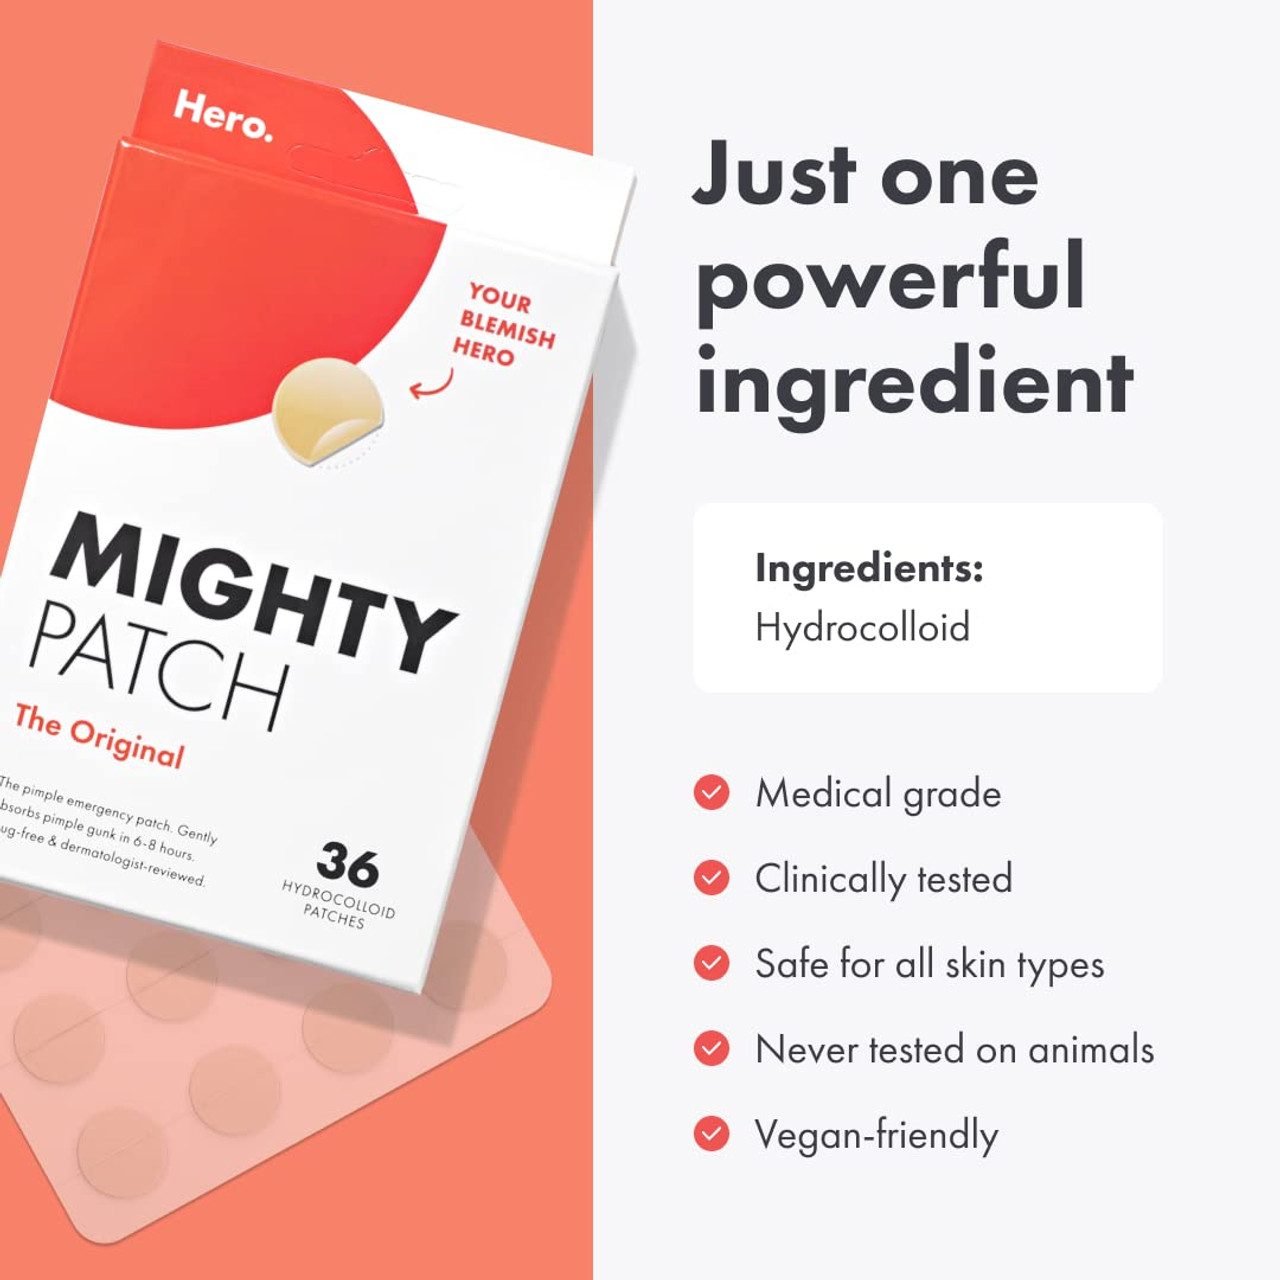 Mighty Patch Original 36ct and Surface 10ct Bundle